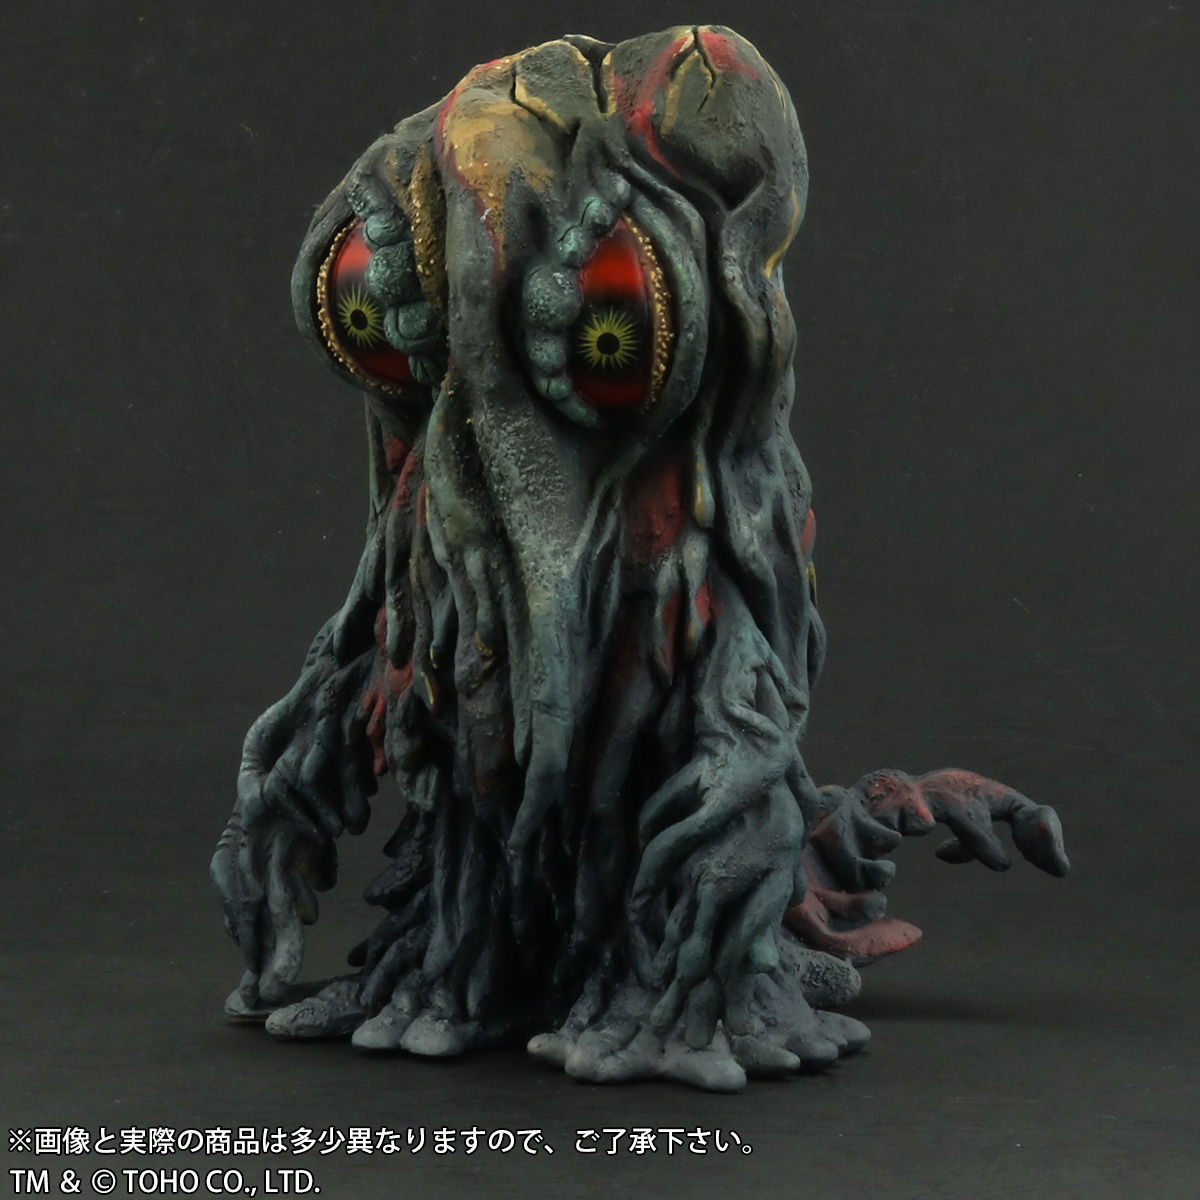 Details about   Japan Rare X-Plus Defo Real Series Hedorah Green Body Limited Edition PVC Figure 